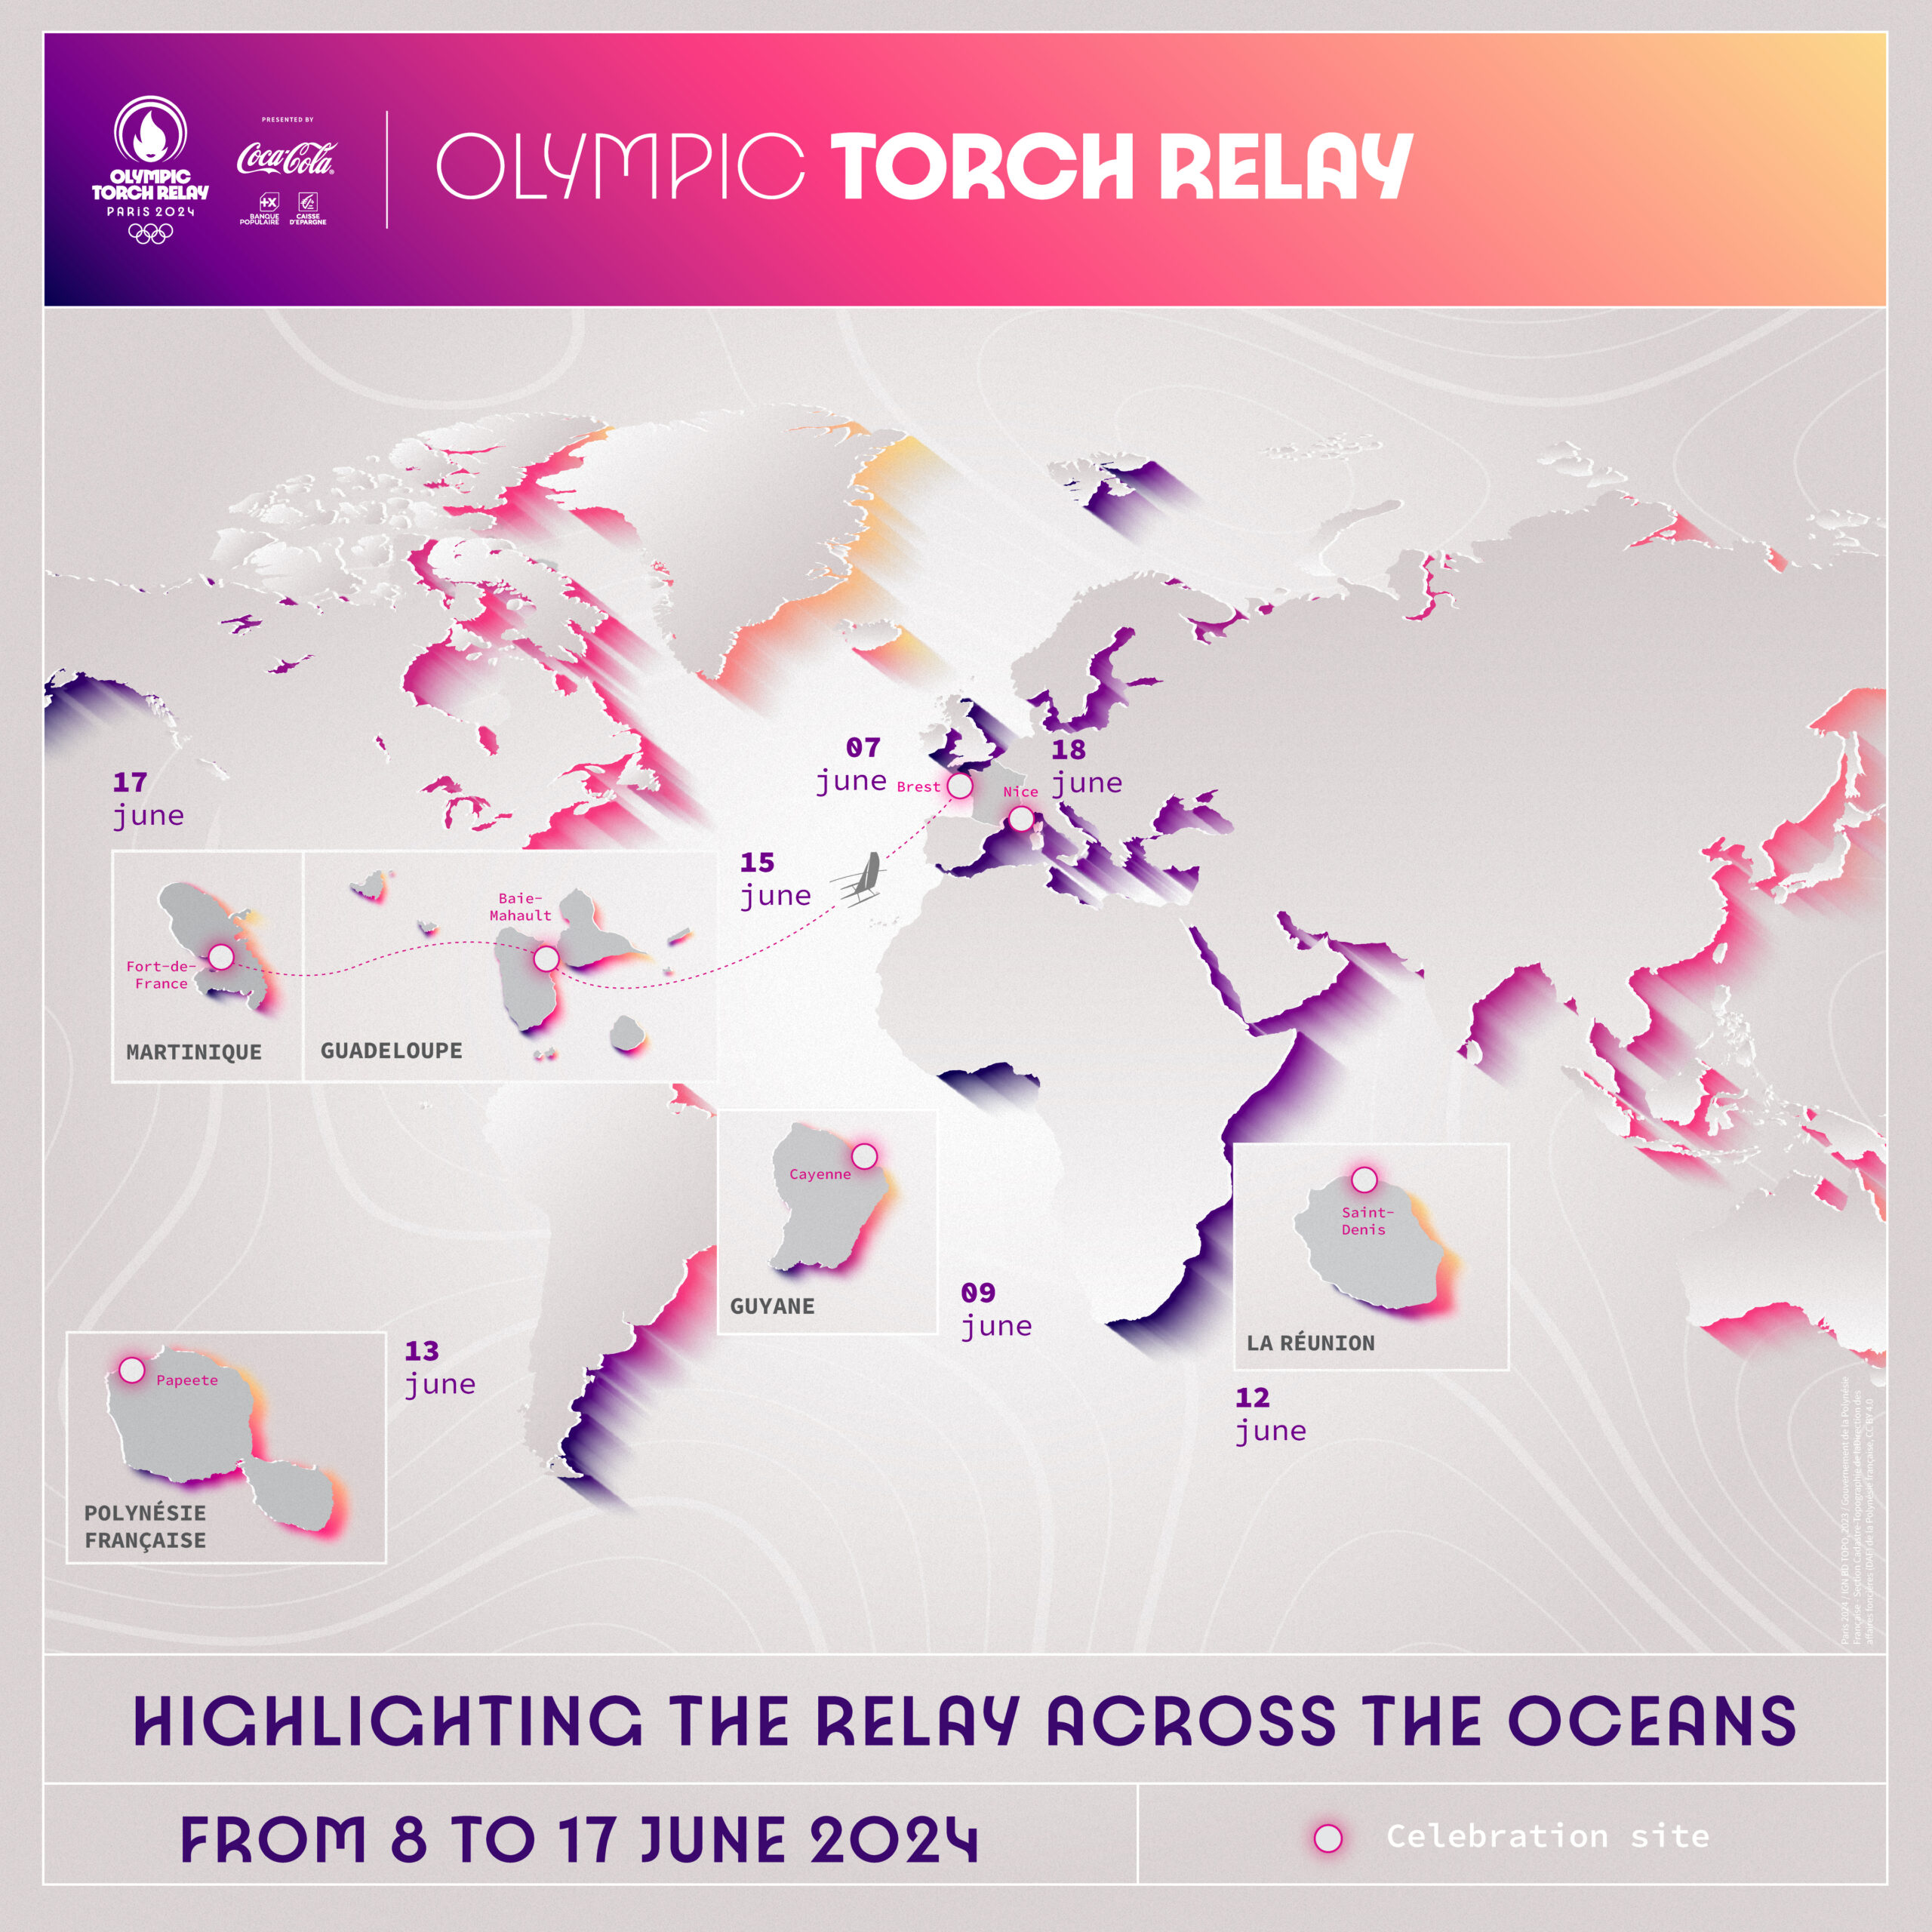 Paris 2024 Olympic Torch Relay route